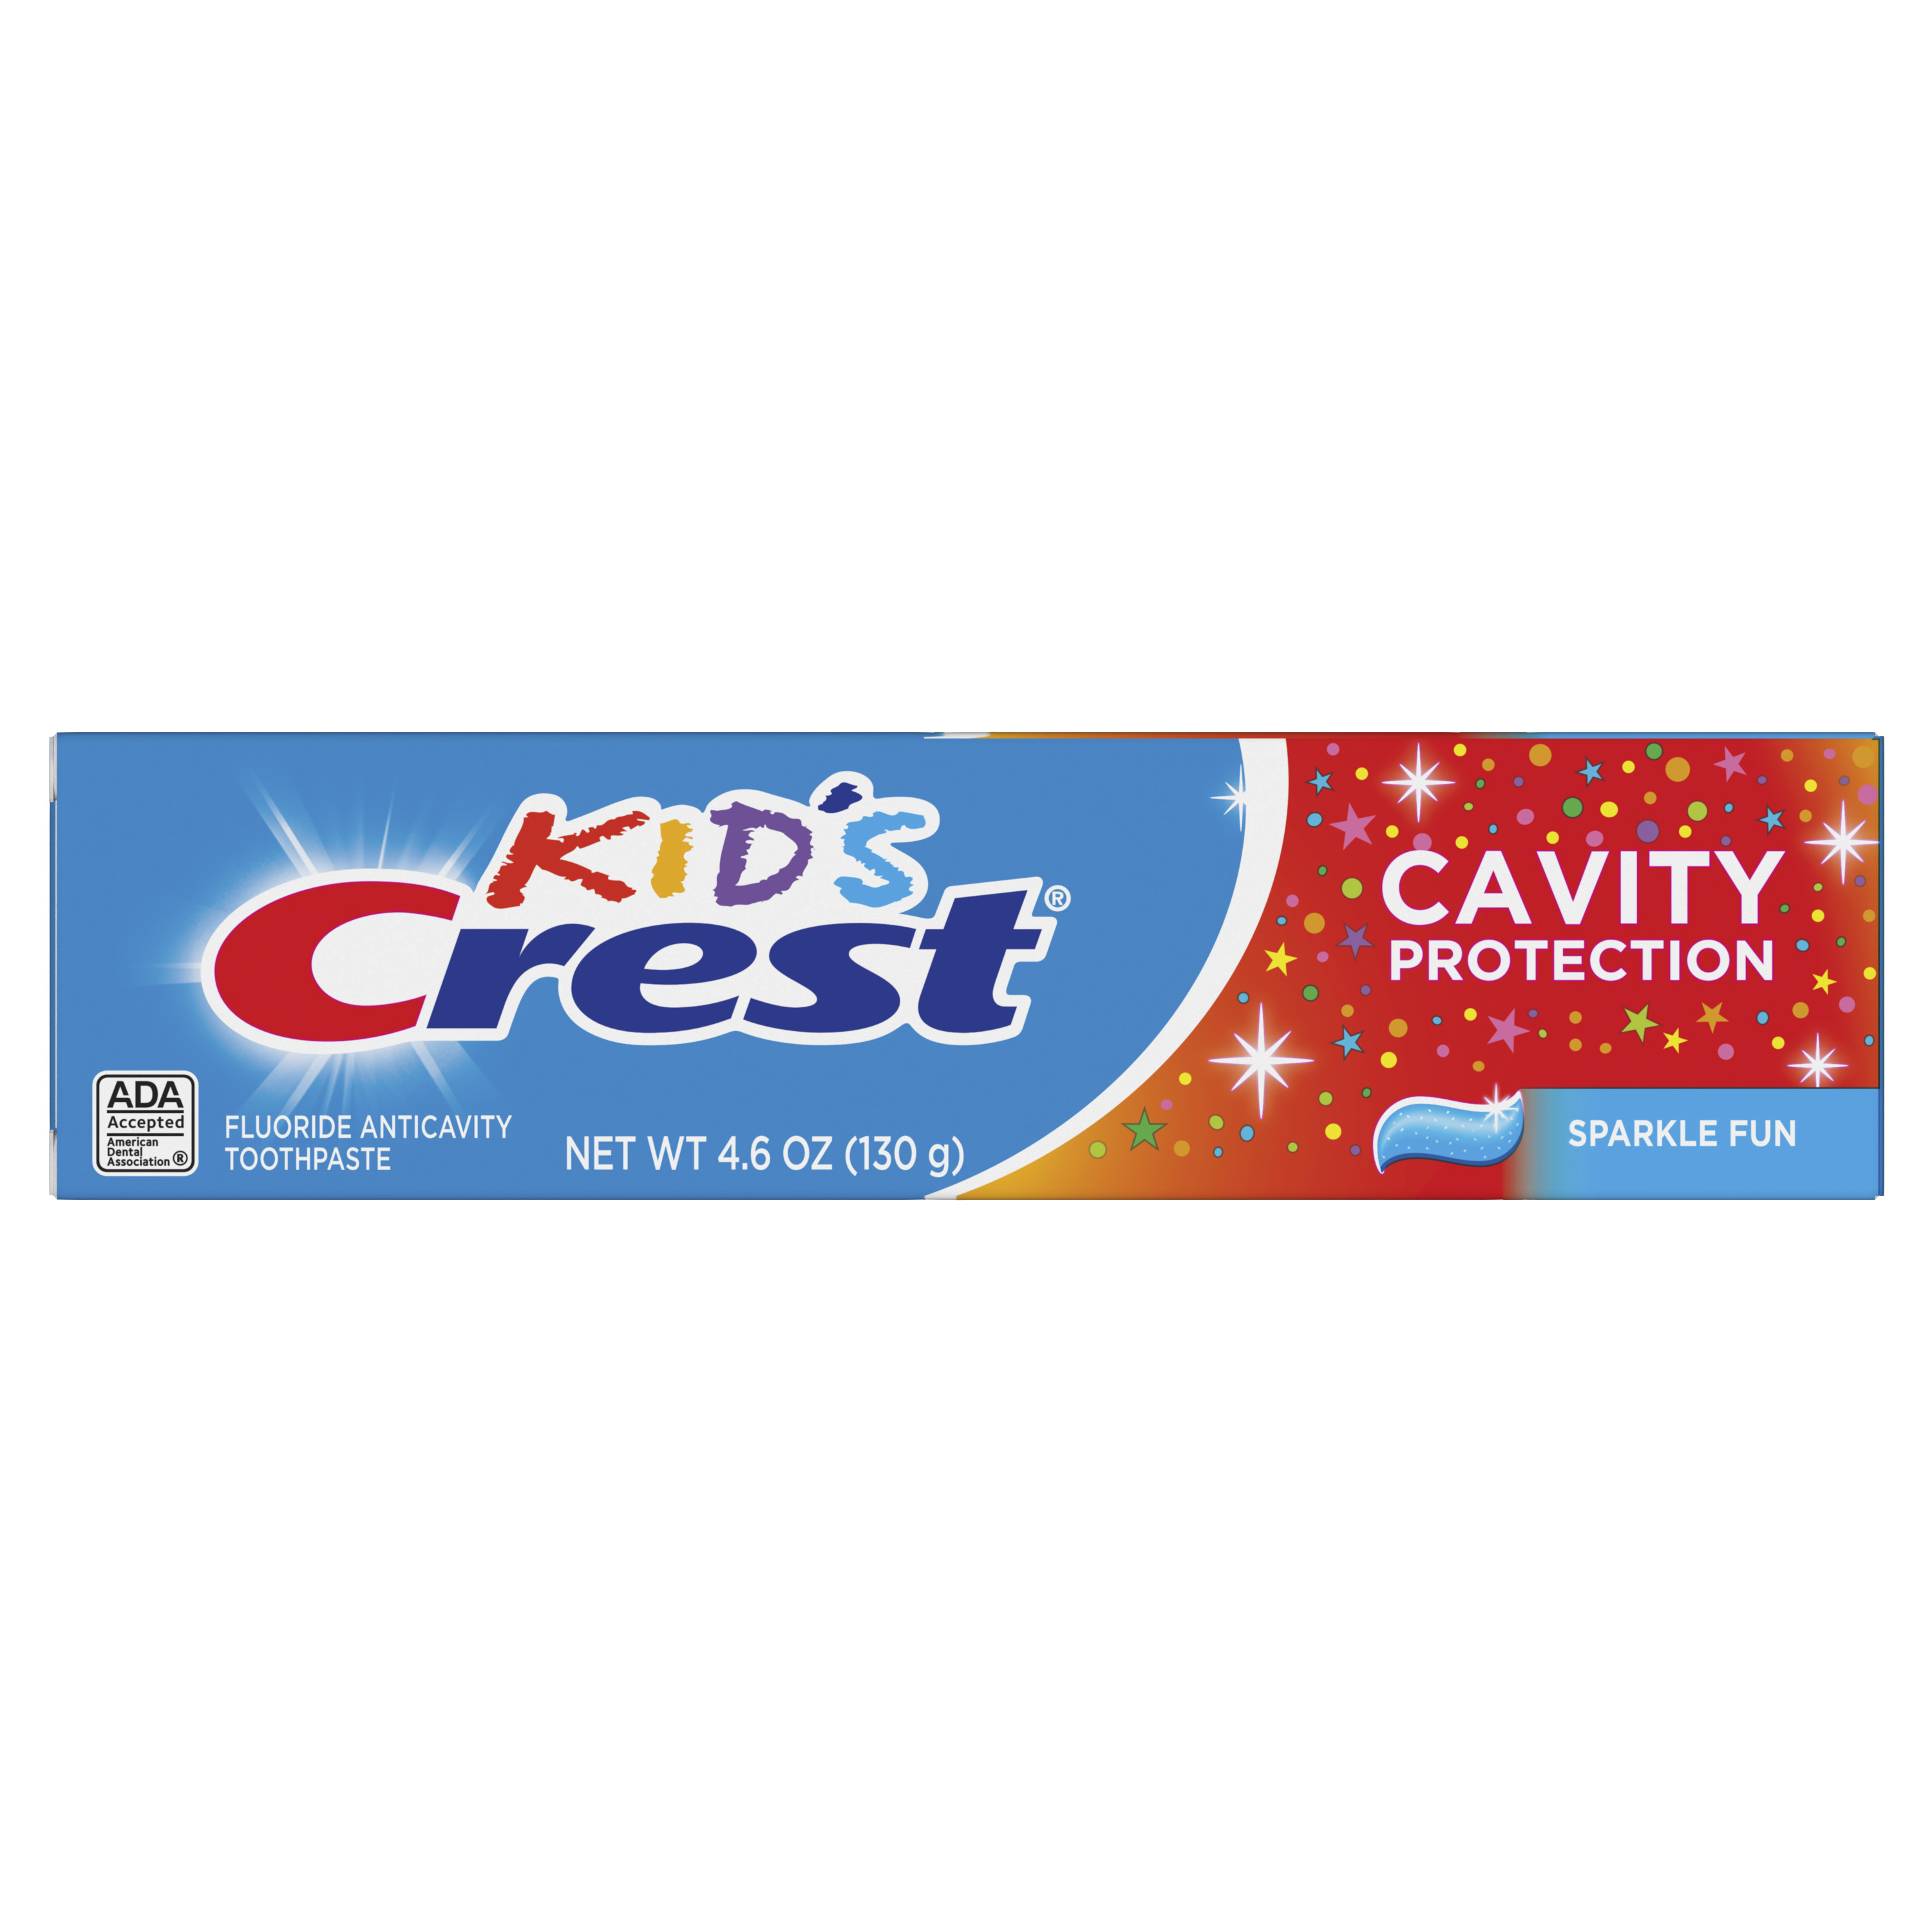 Crest Kids Cavity Protection Toothpaste, Sparkle Fun Flavor, 4.6 oz - image 1 of 9